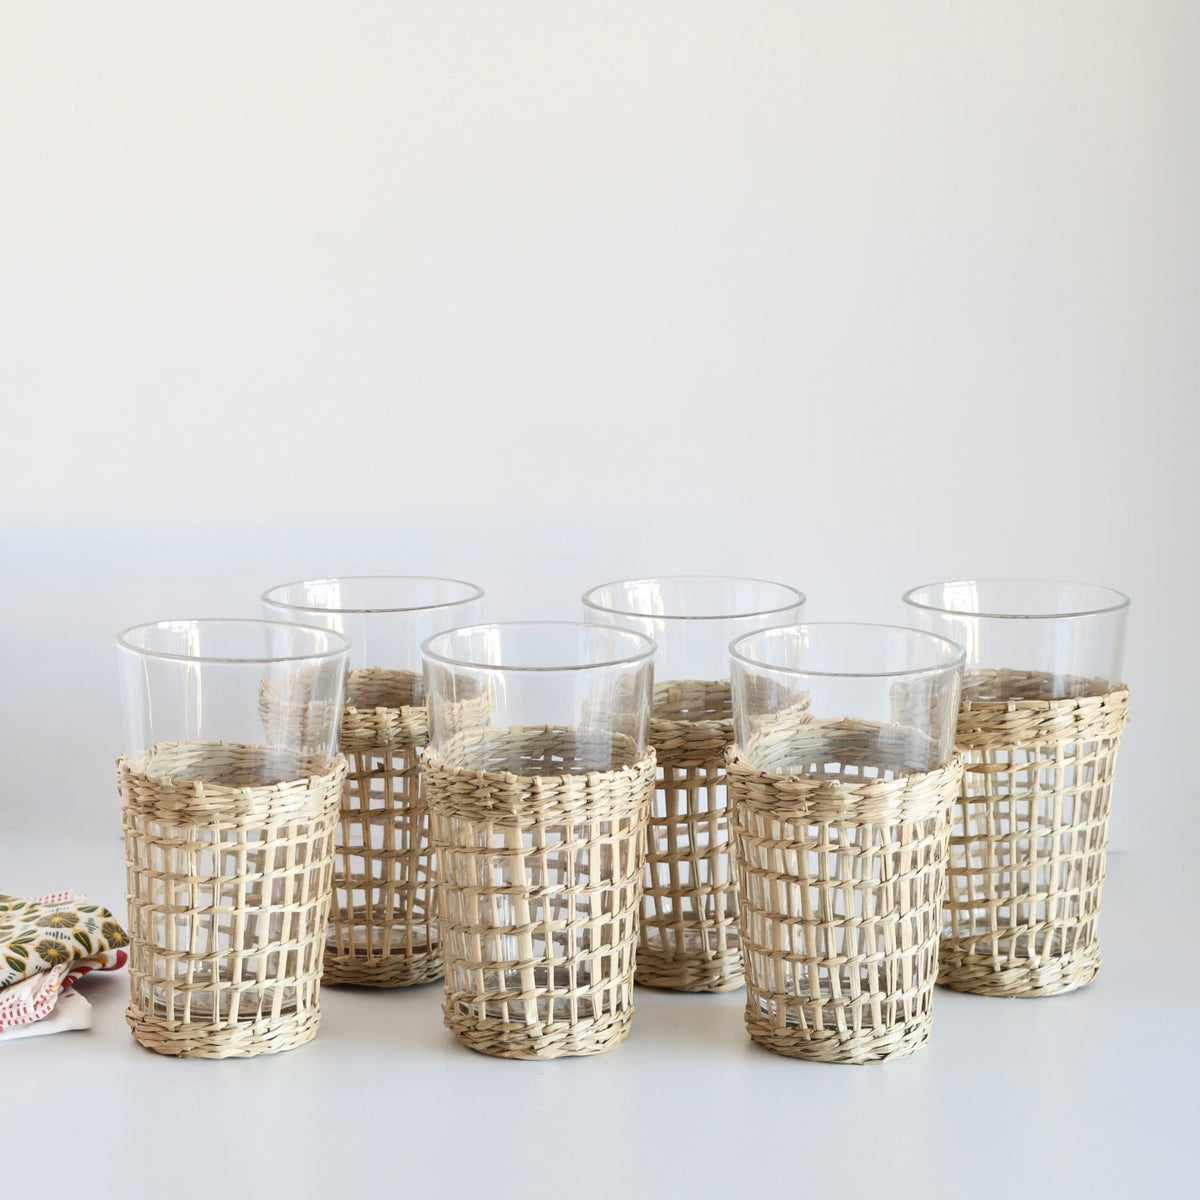 Sulu Drinking Glasses With Woven Seagrass Sleeve - Set of Six - Holistic Habitat 